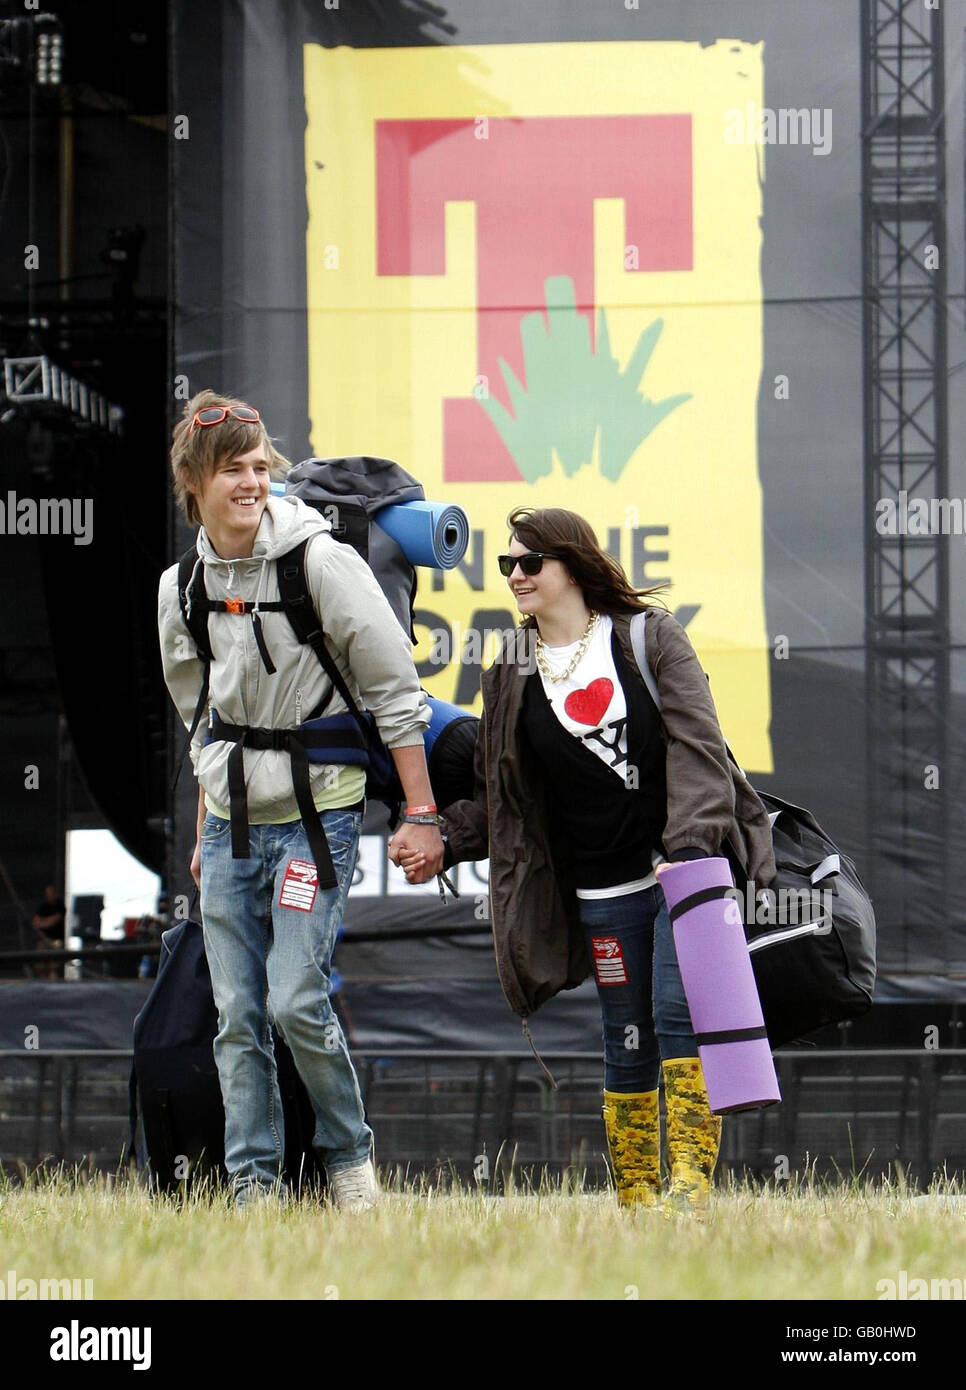 Robert Cartwright, 18, and Melissa Purcell, 18, arrive at the T in the Park music festival near Kinross in Scotland. Stock Photo